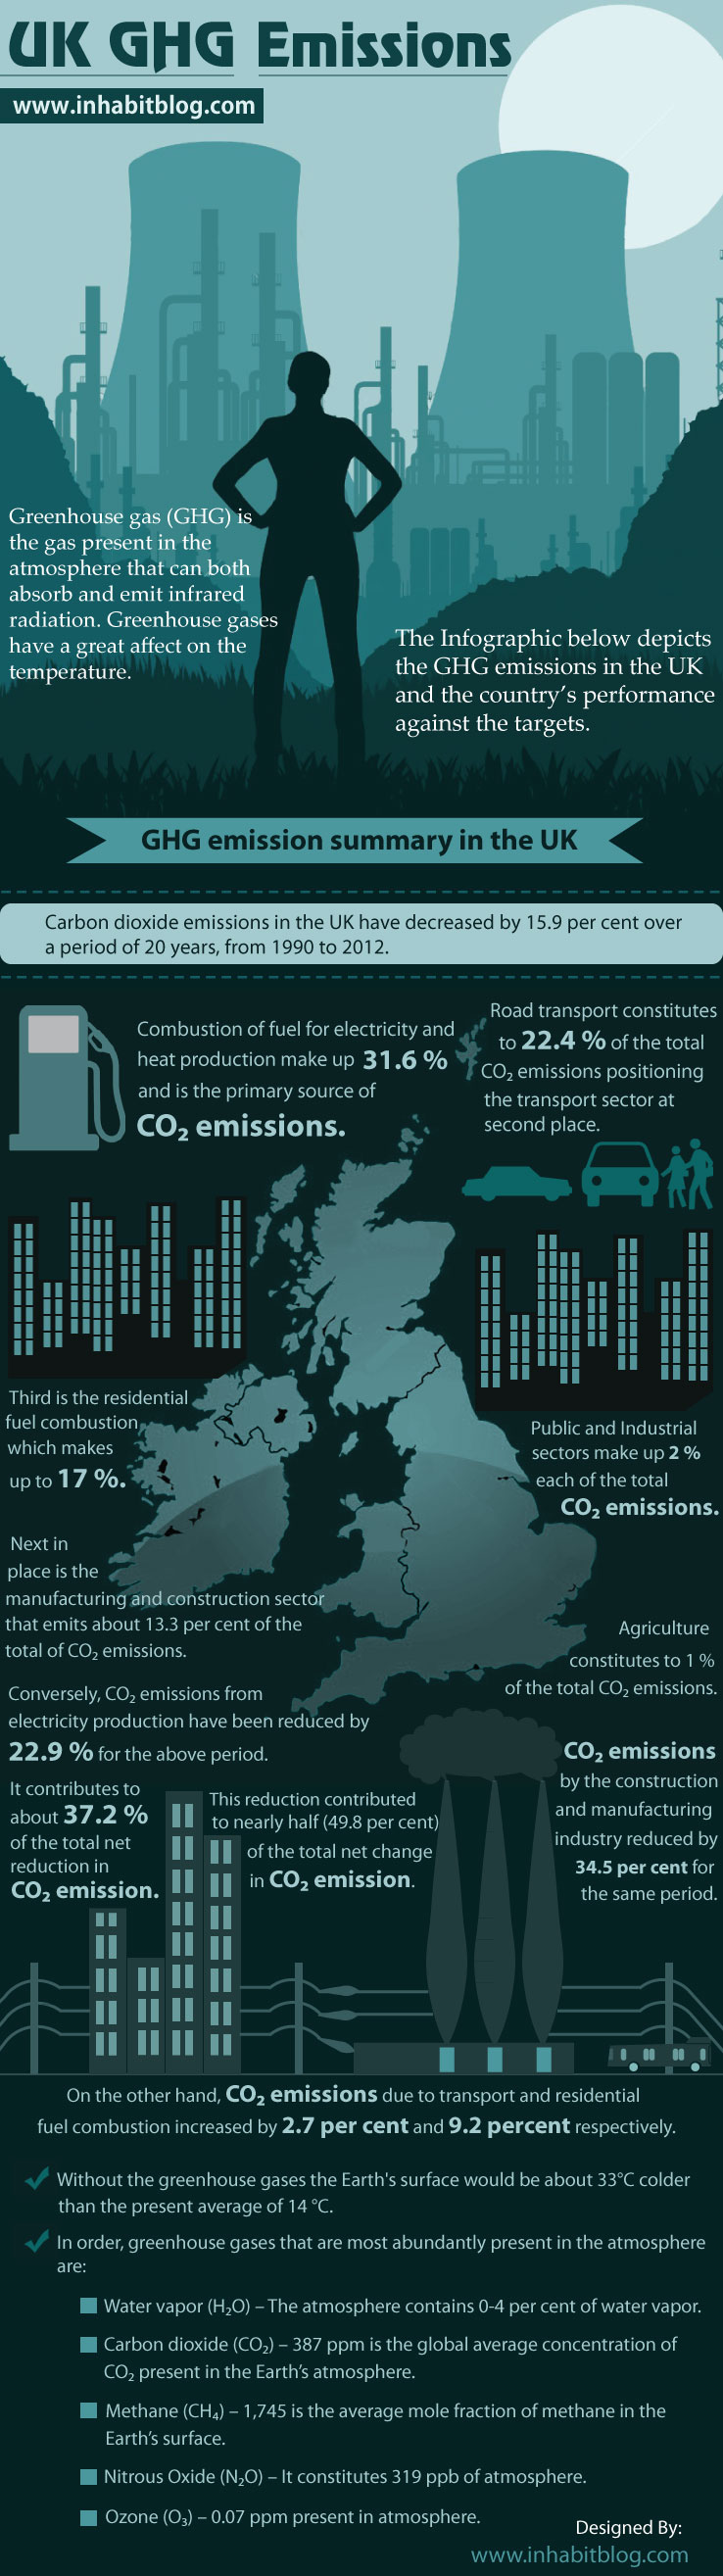 GHG emission summary in the UK